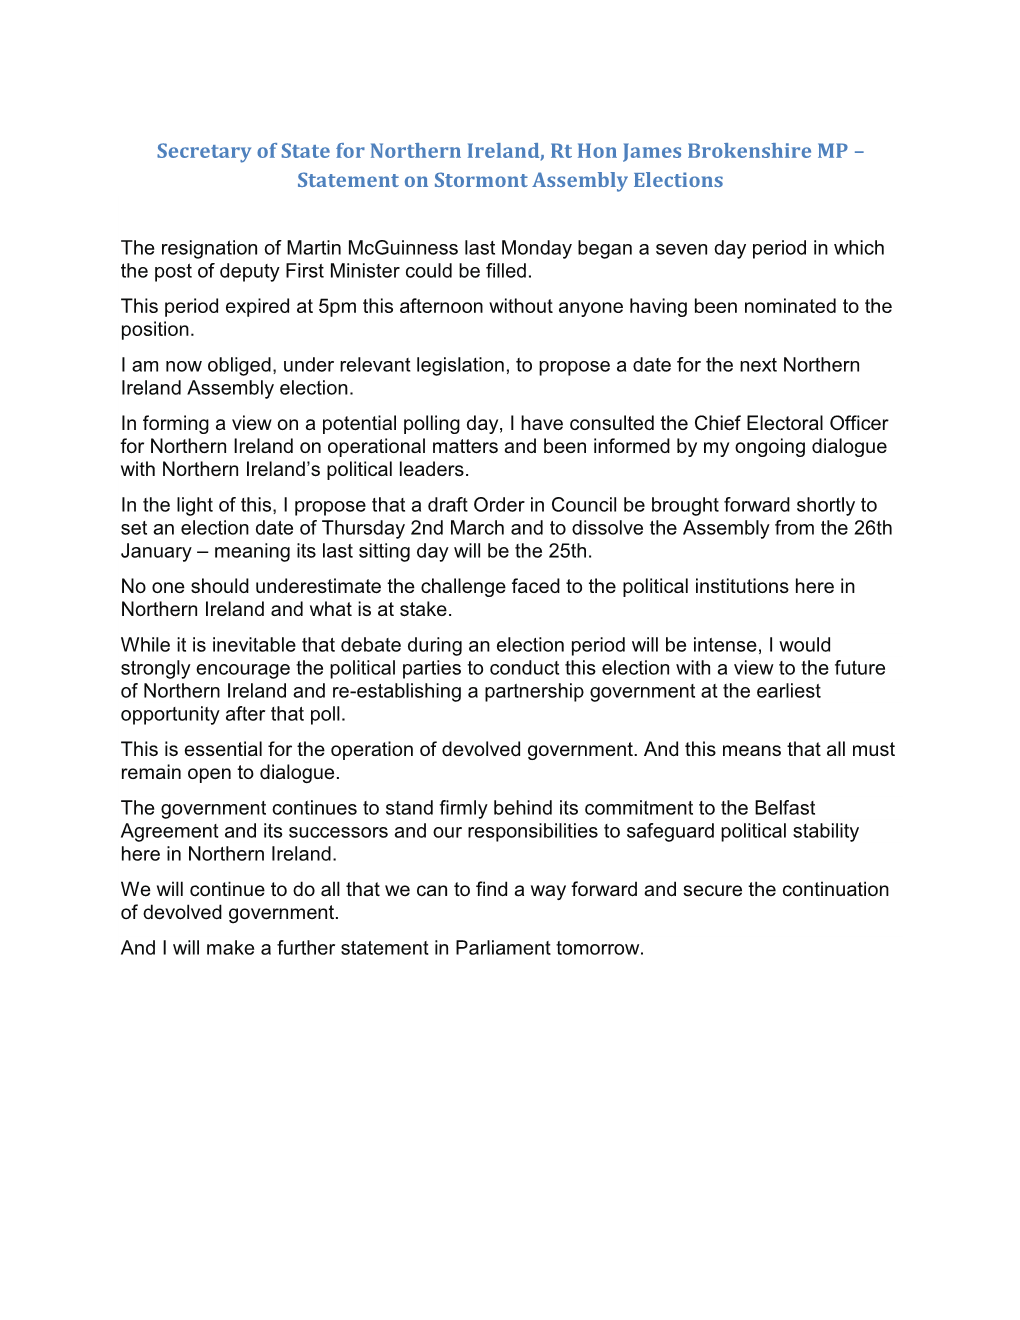 Secretary of State for Northern Ireland, Rt Hon James Brokenshire MP – Statement on Stormont Assembly Elections